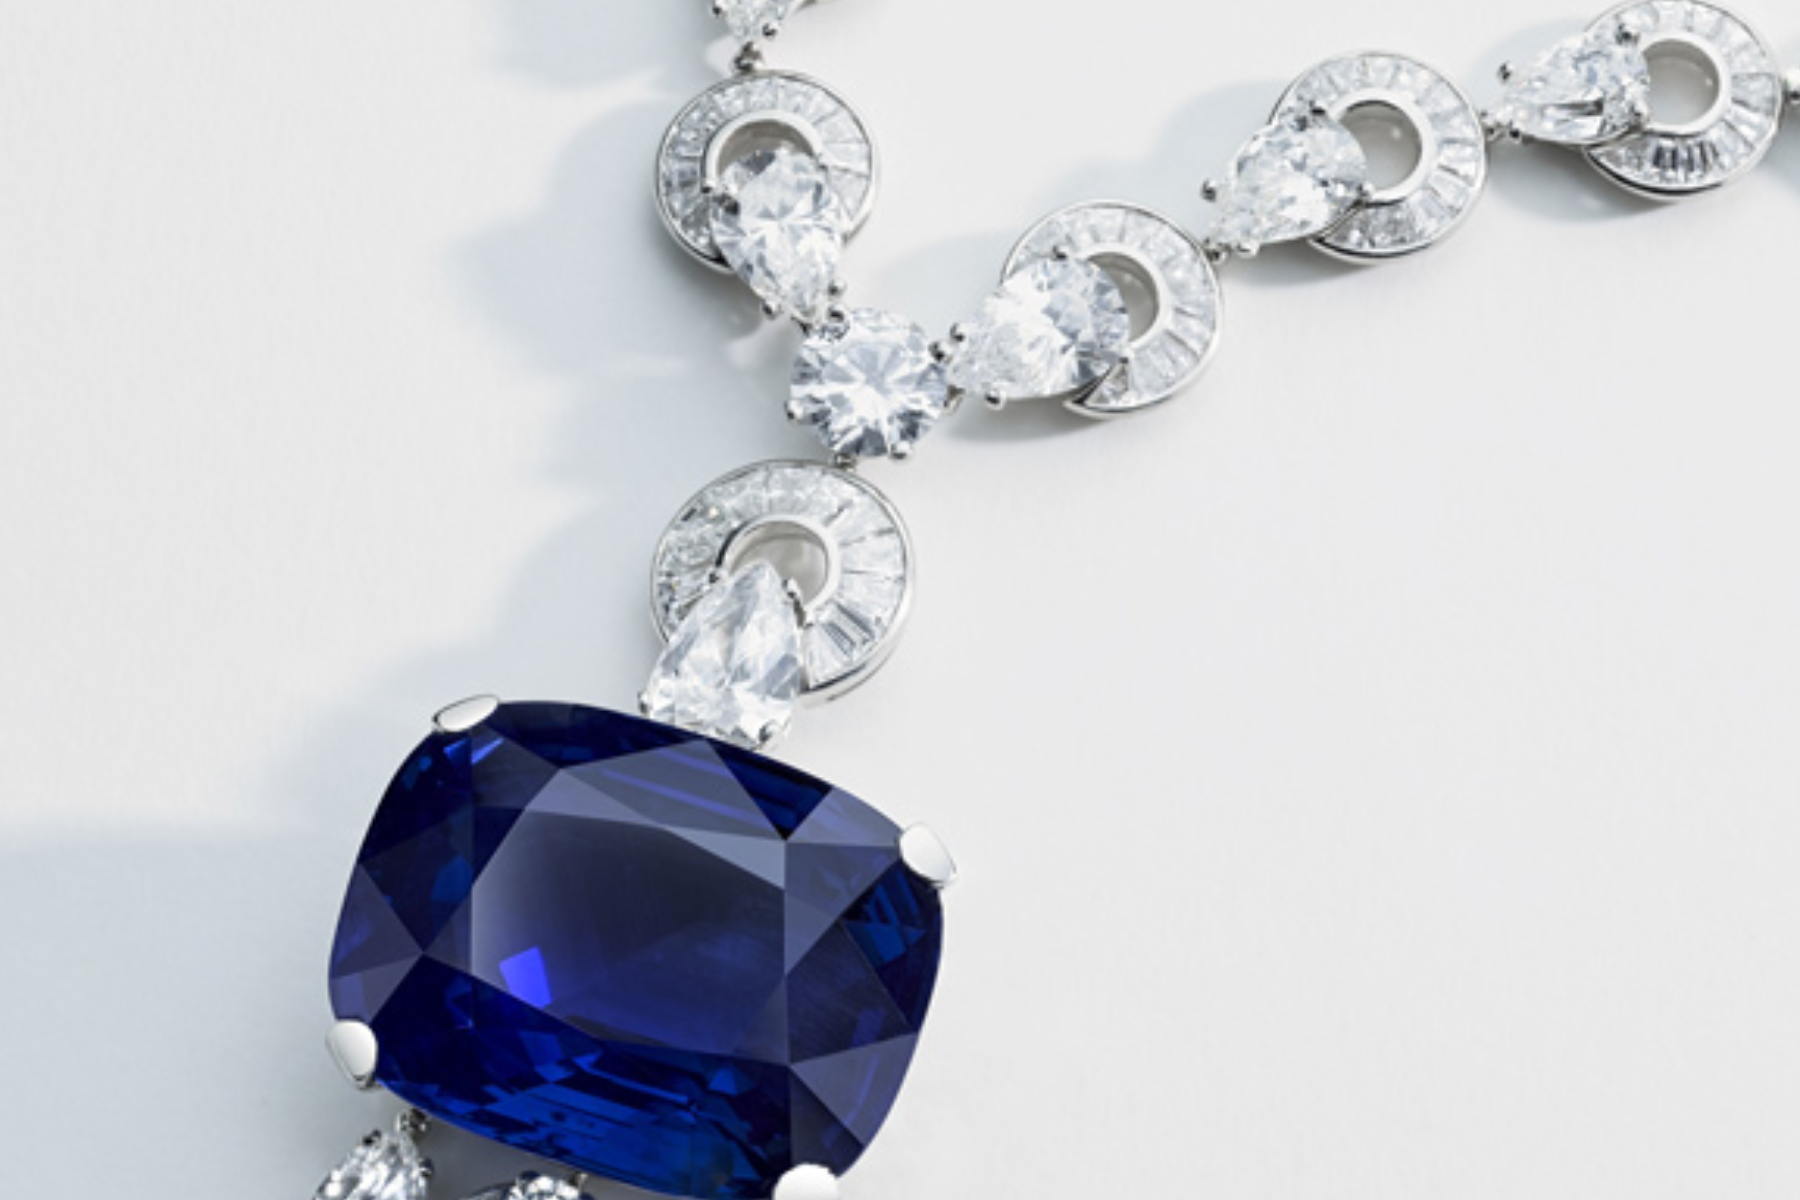 A close-up look of necklace with a rare 118 Ct. sapphire heads